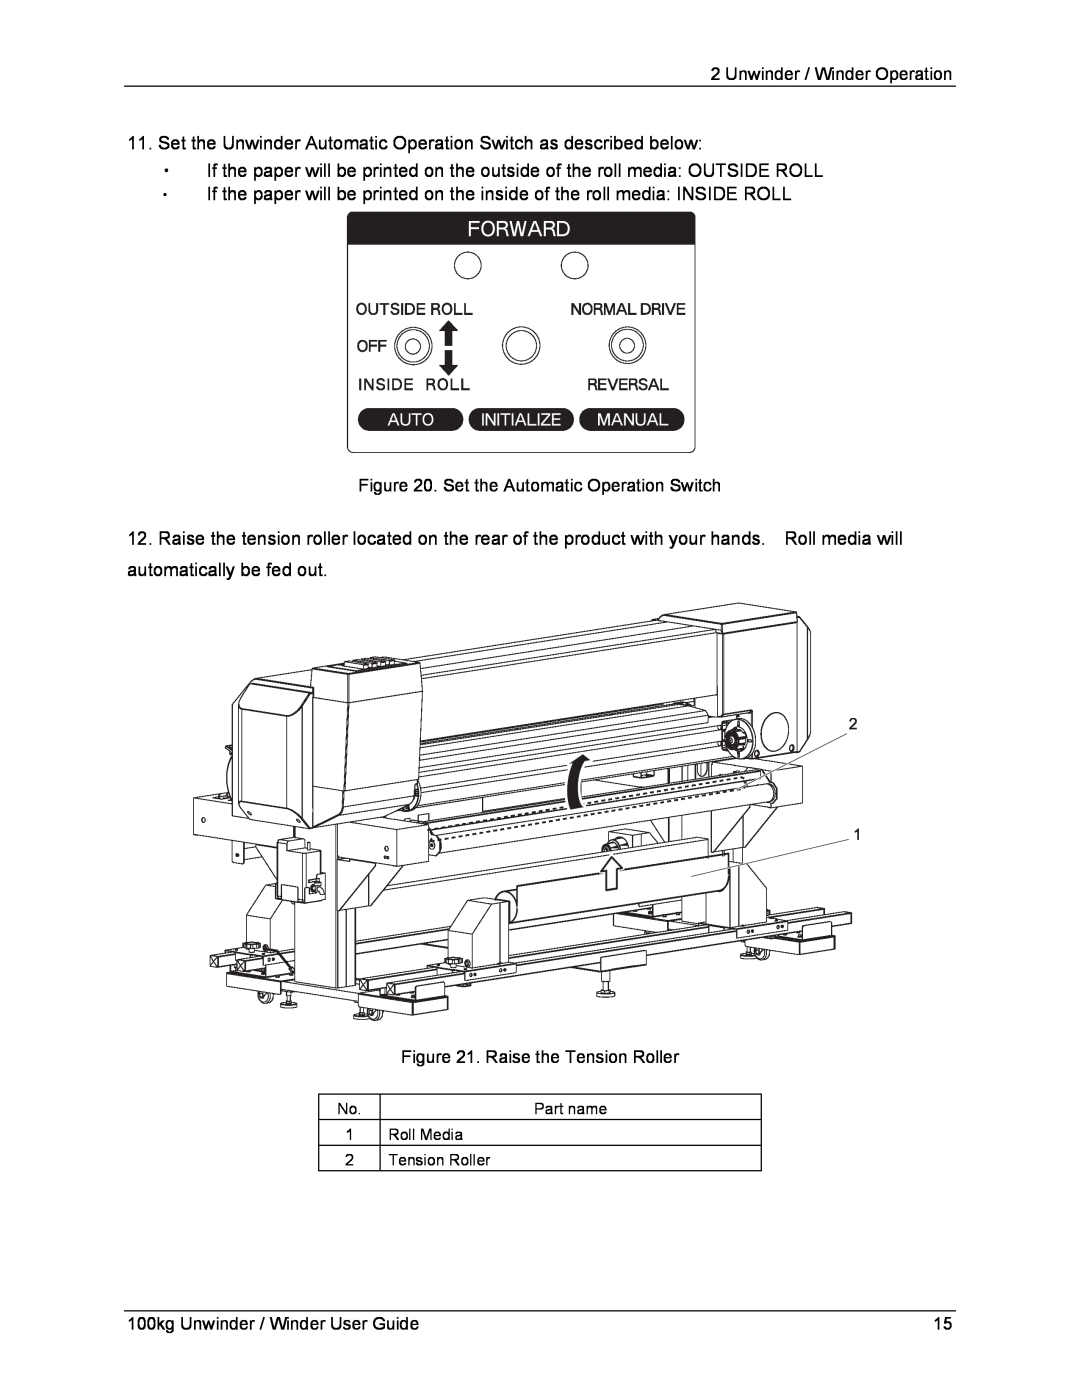 Xerox 8254E, 8264E manual Unwinder / Winder Operation, Set the Automatic Operation Switch, Raise the Tension Roller 